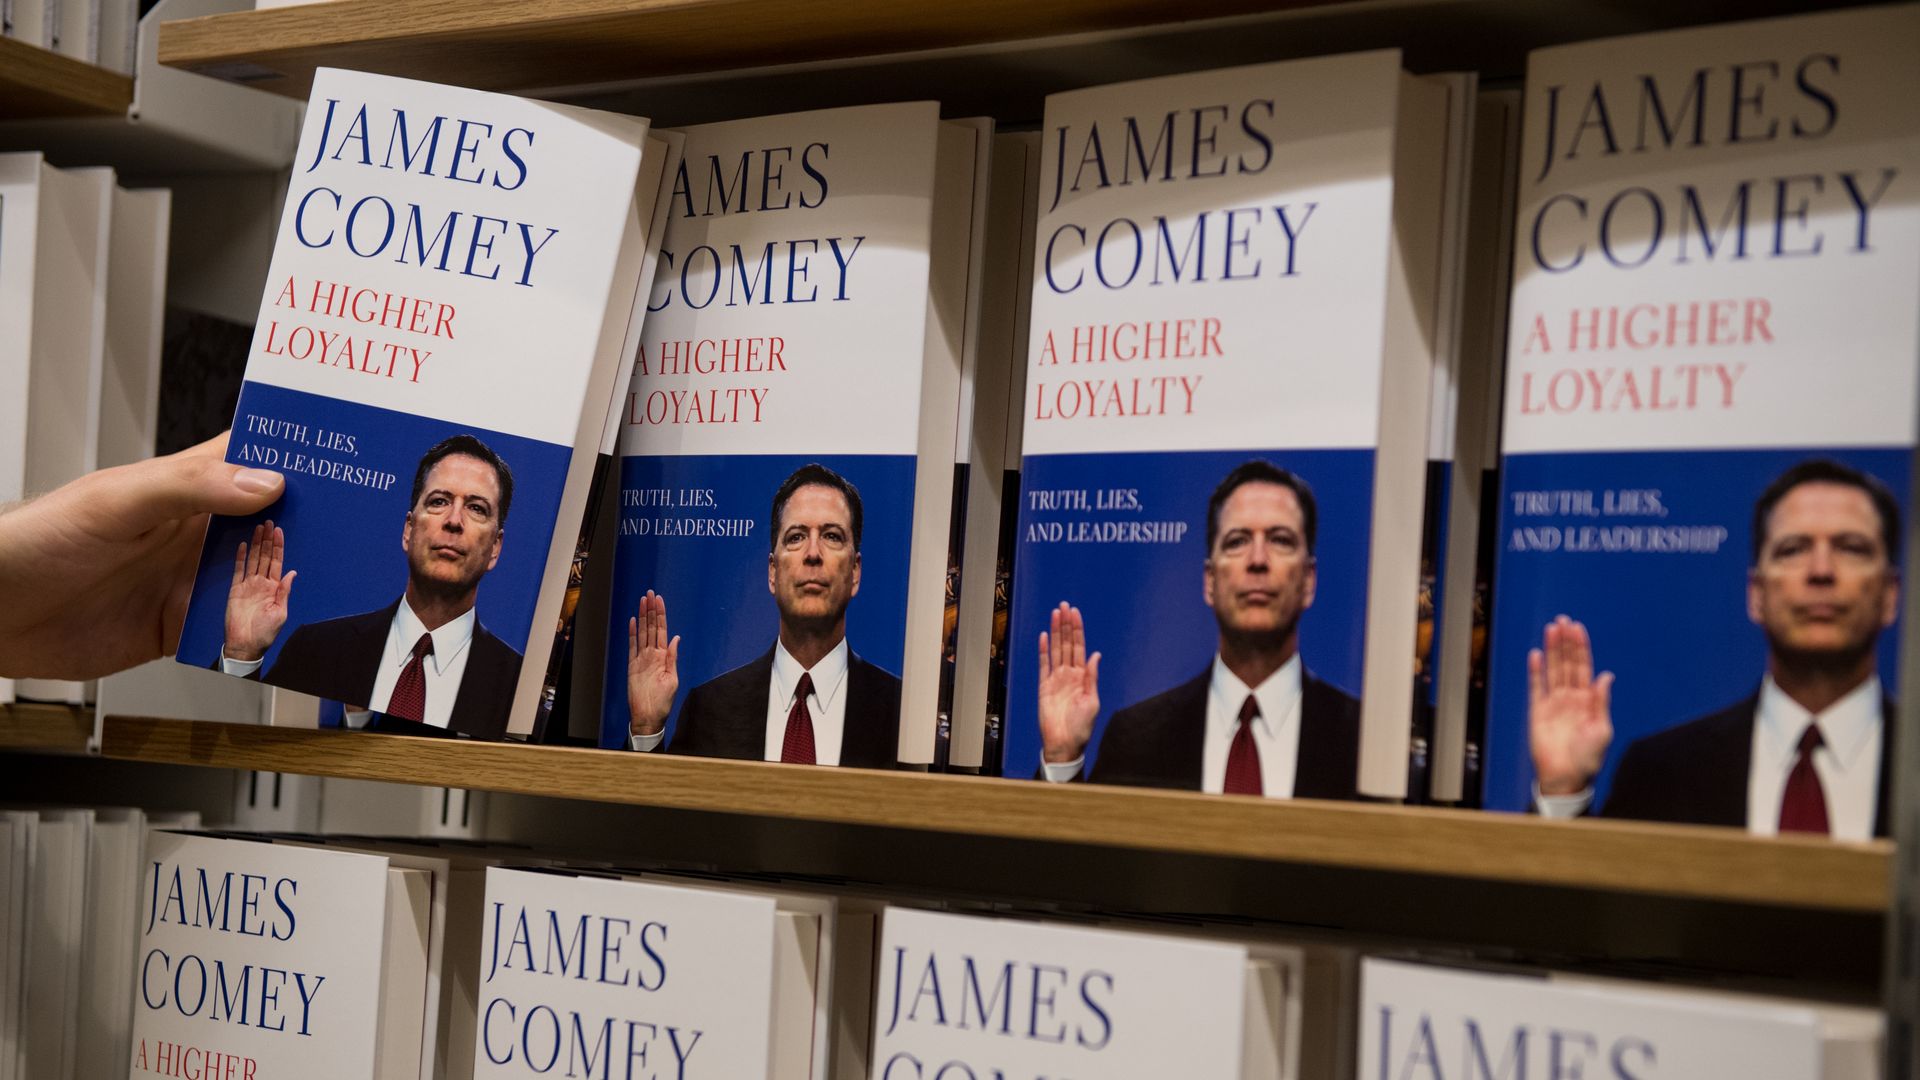 A customer reaches for Comey's book in a store